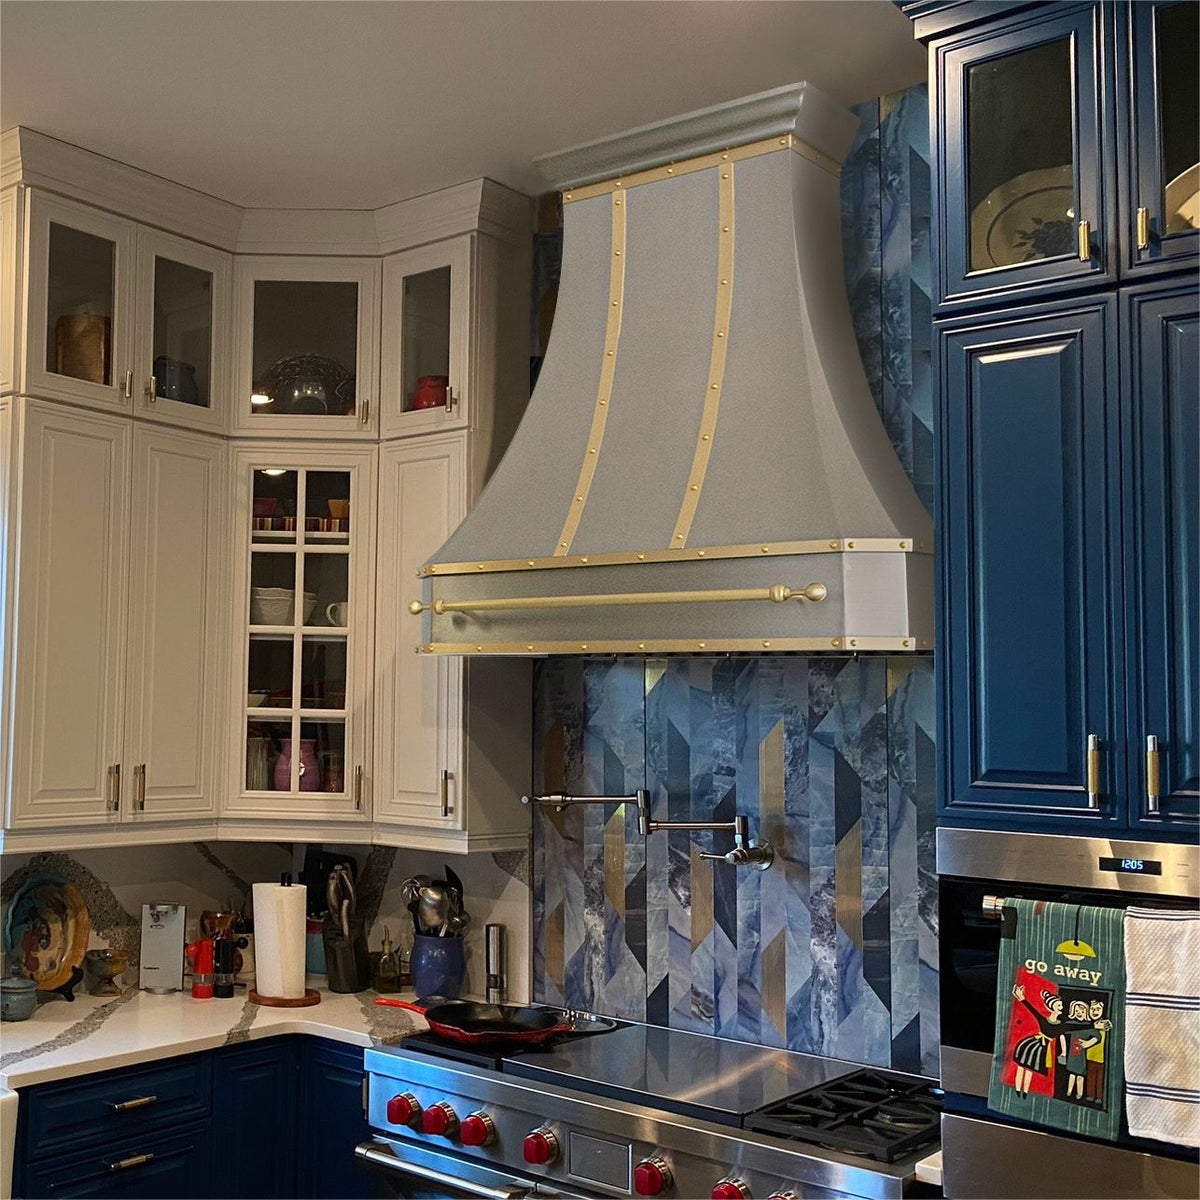 Fobest Classic Design Custom Brushed Stainless Steel Range Hood with Brass Straps and Pot Rail FSS-66 - Fobest Appliance